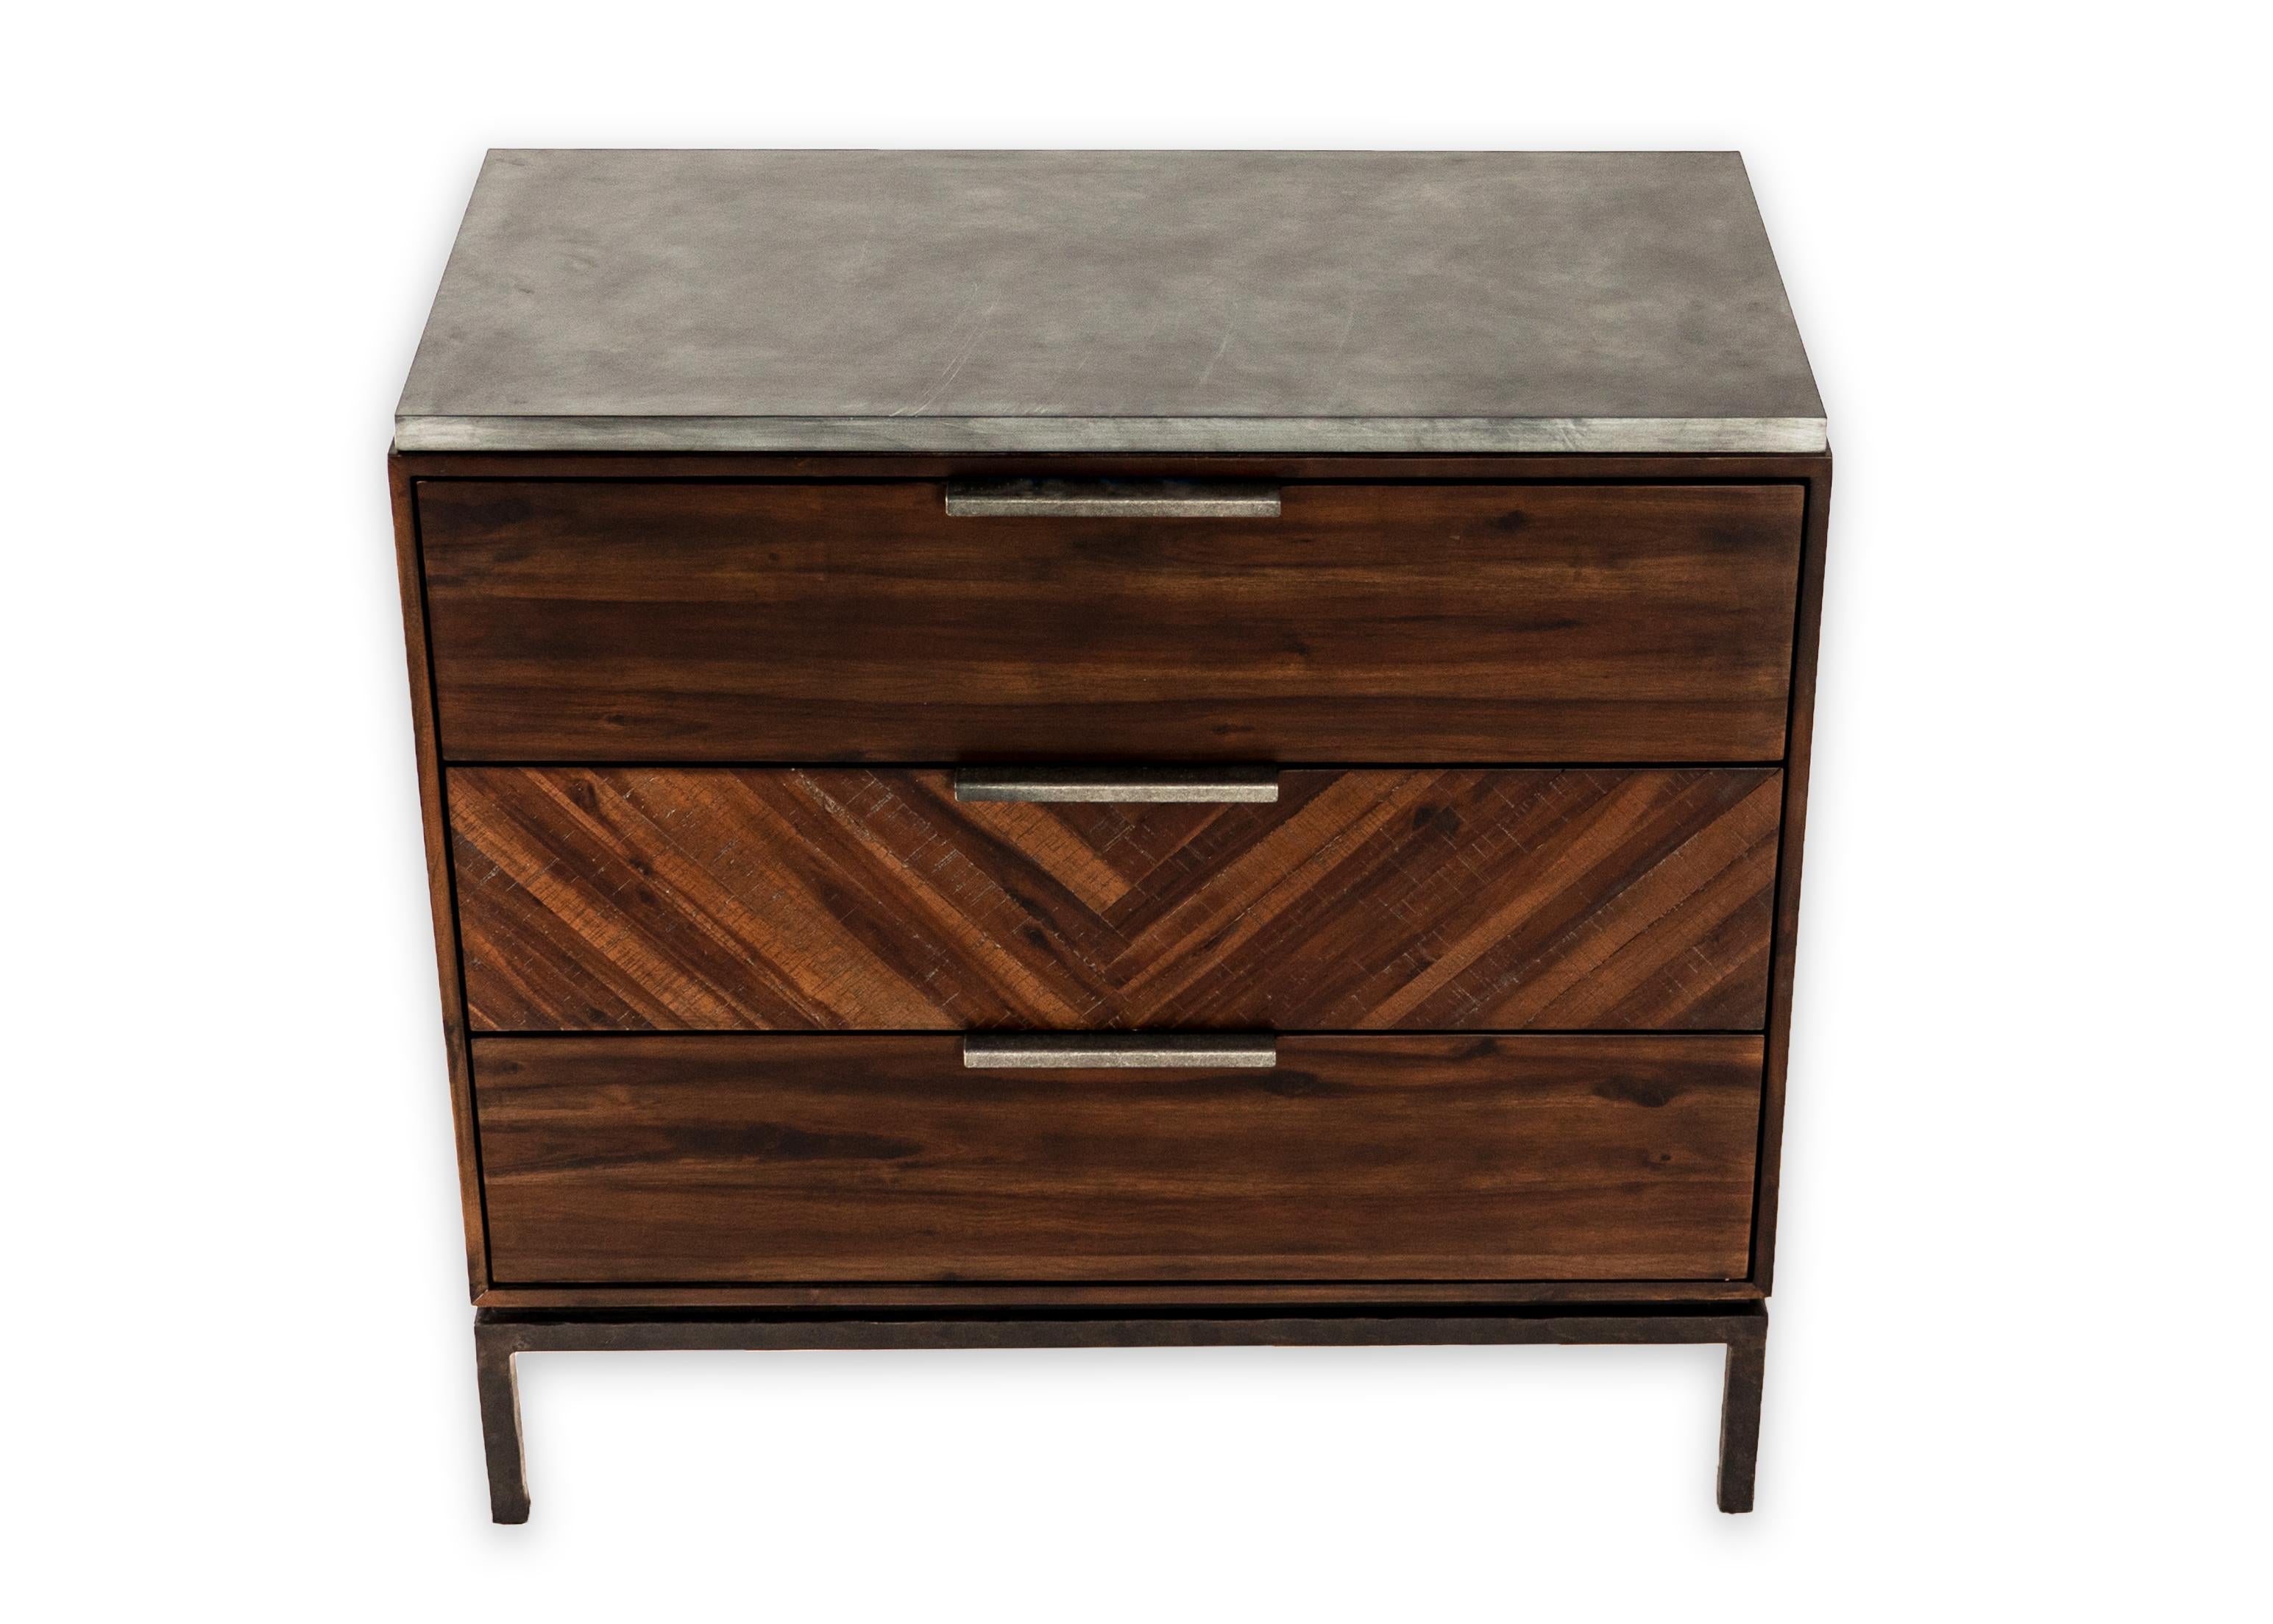 Acacia wood chest of drawers hammered steel base with zinc top.